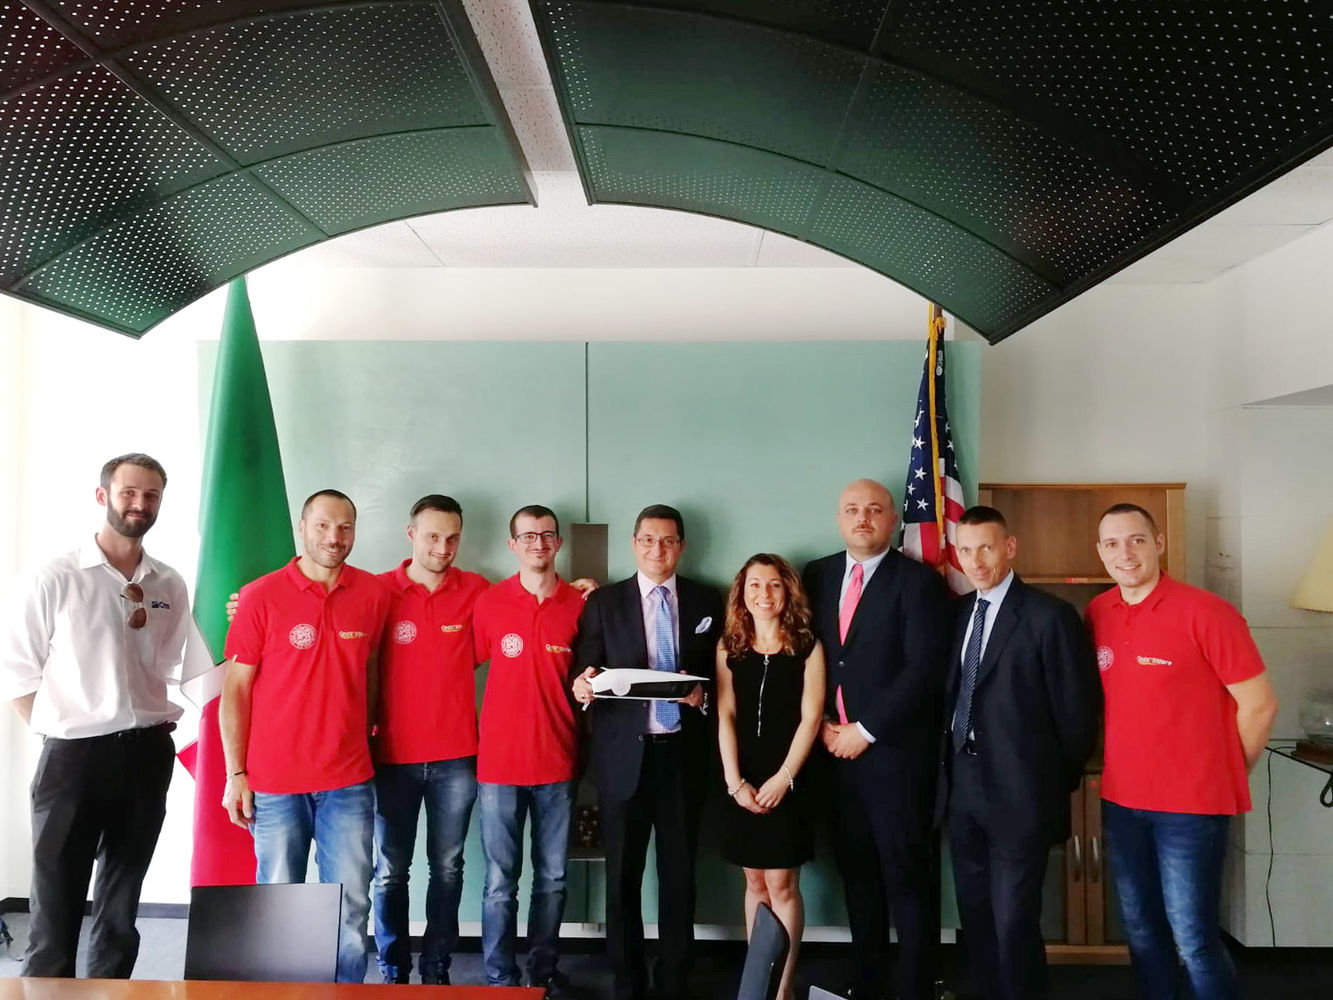 Scm Group and Cms visit the Italian Consulate in Chicago with the Onda Solare team